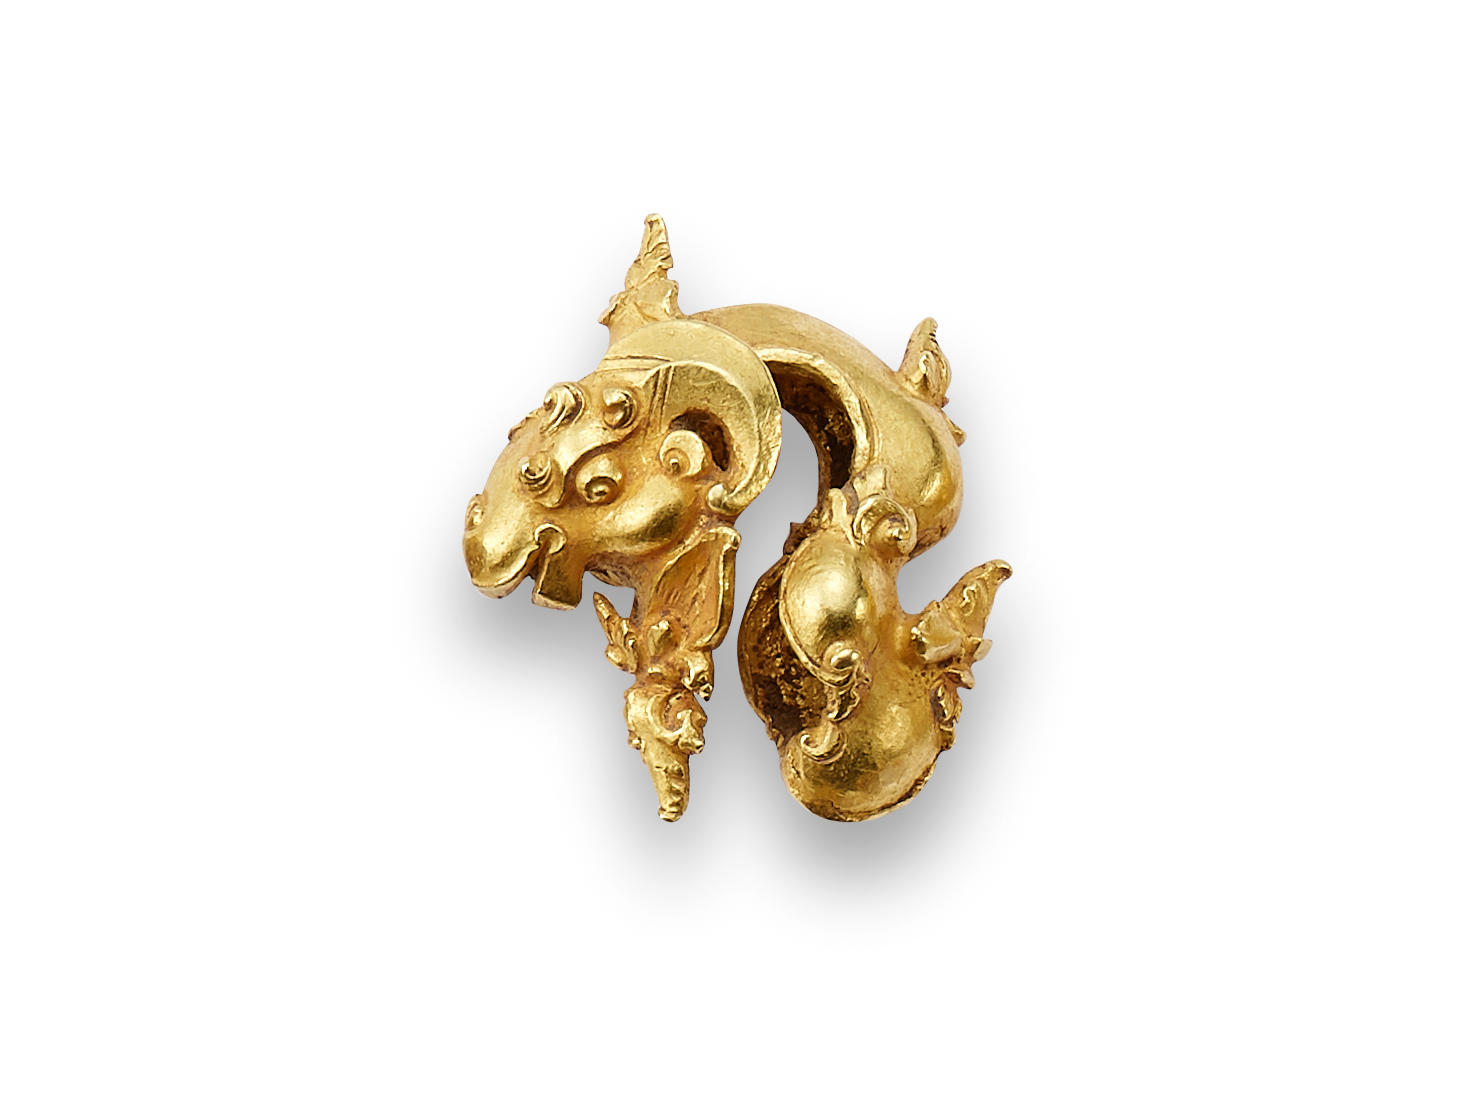 A JAVANESE GOLD RAM-FORM EARRING INDONESIA, 10TH-15TH CENTURY